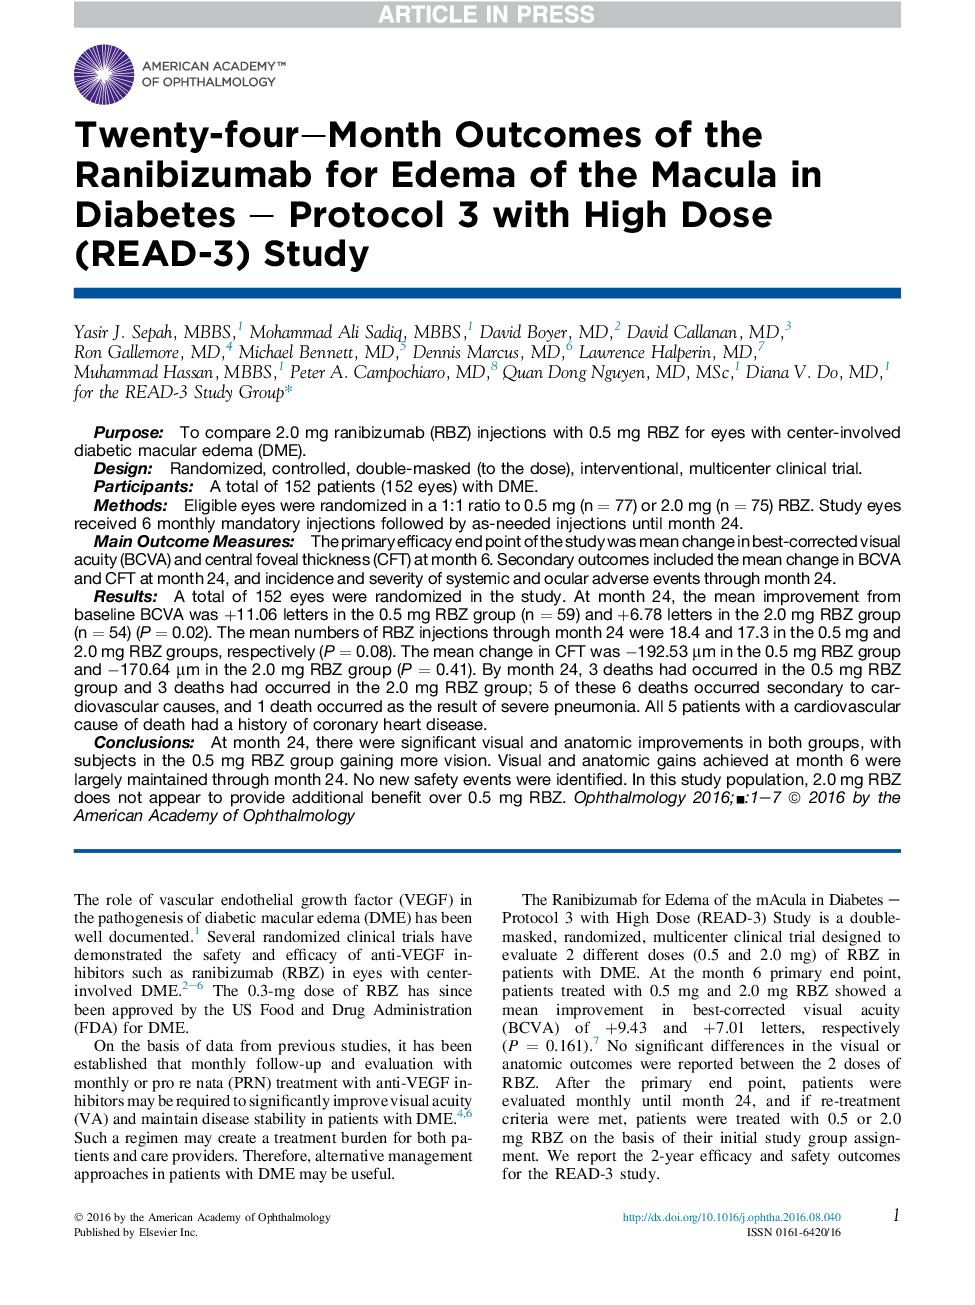 Twenty-four-Month Outcomes of the Ranibizumab for Edema of the Macula in Diabetes - Protocol 3 with High Dose (READ-3) Study